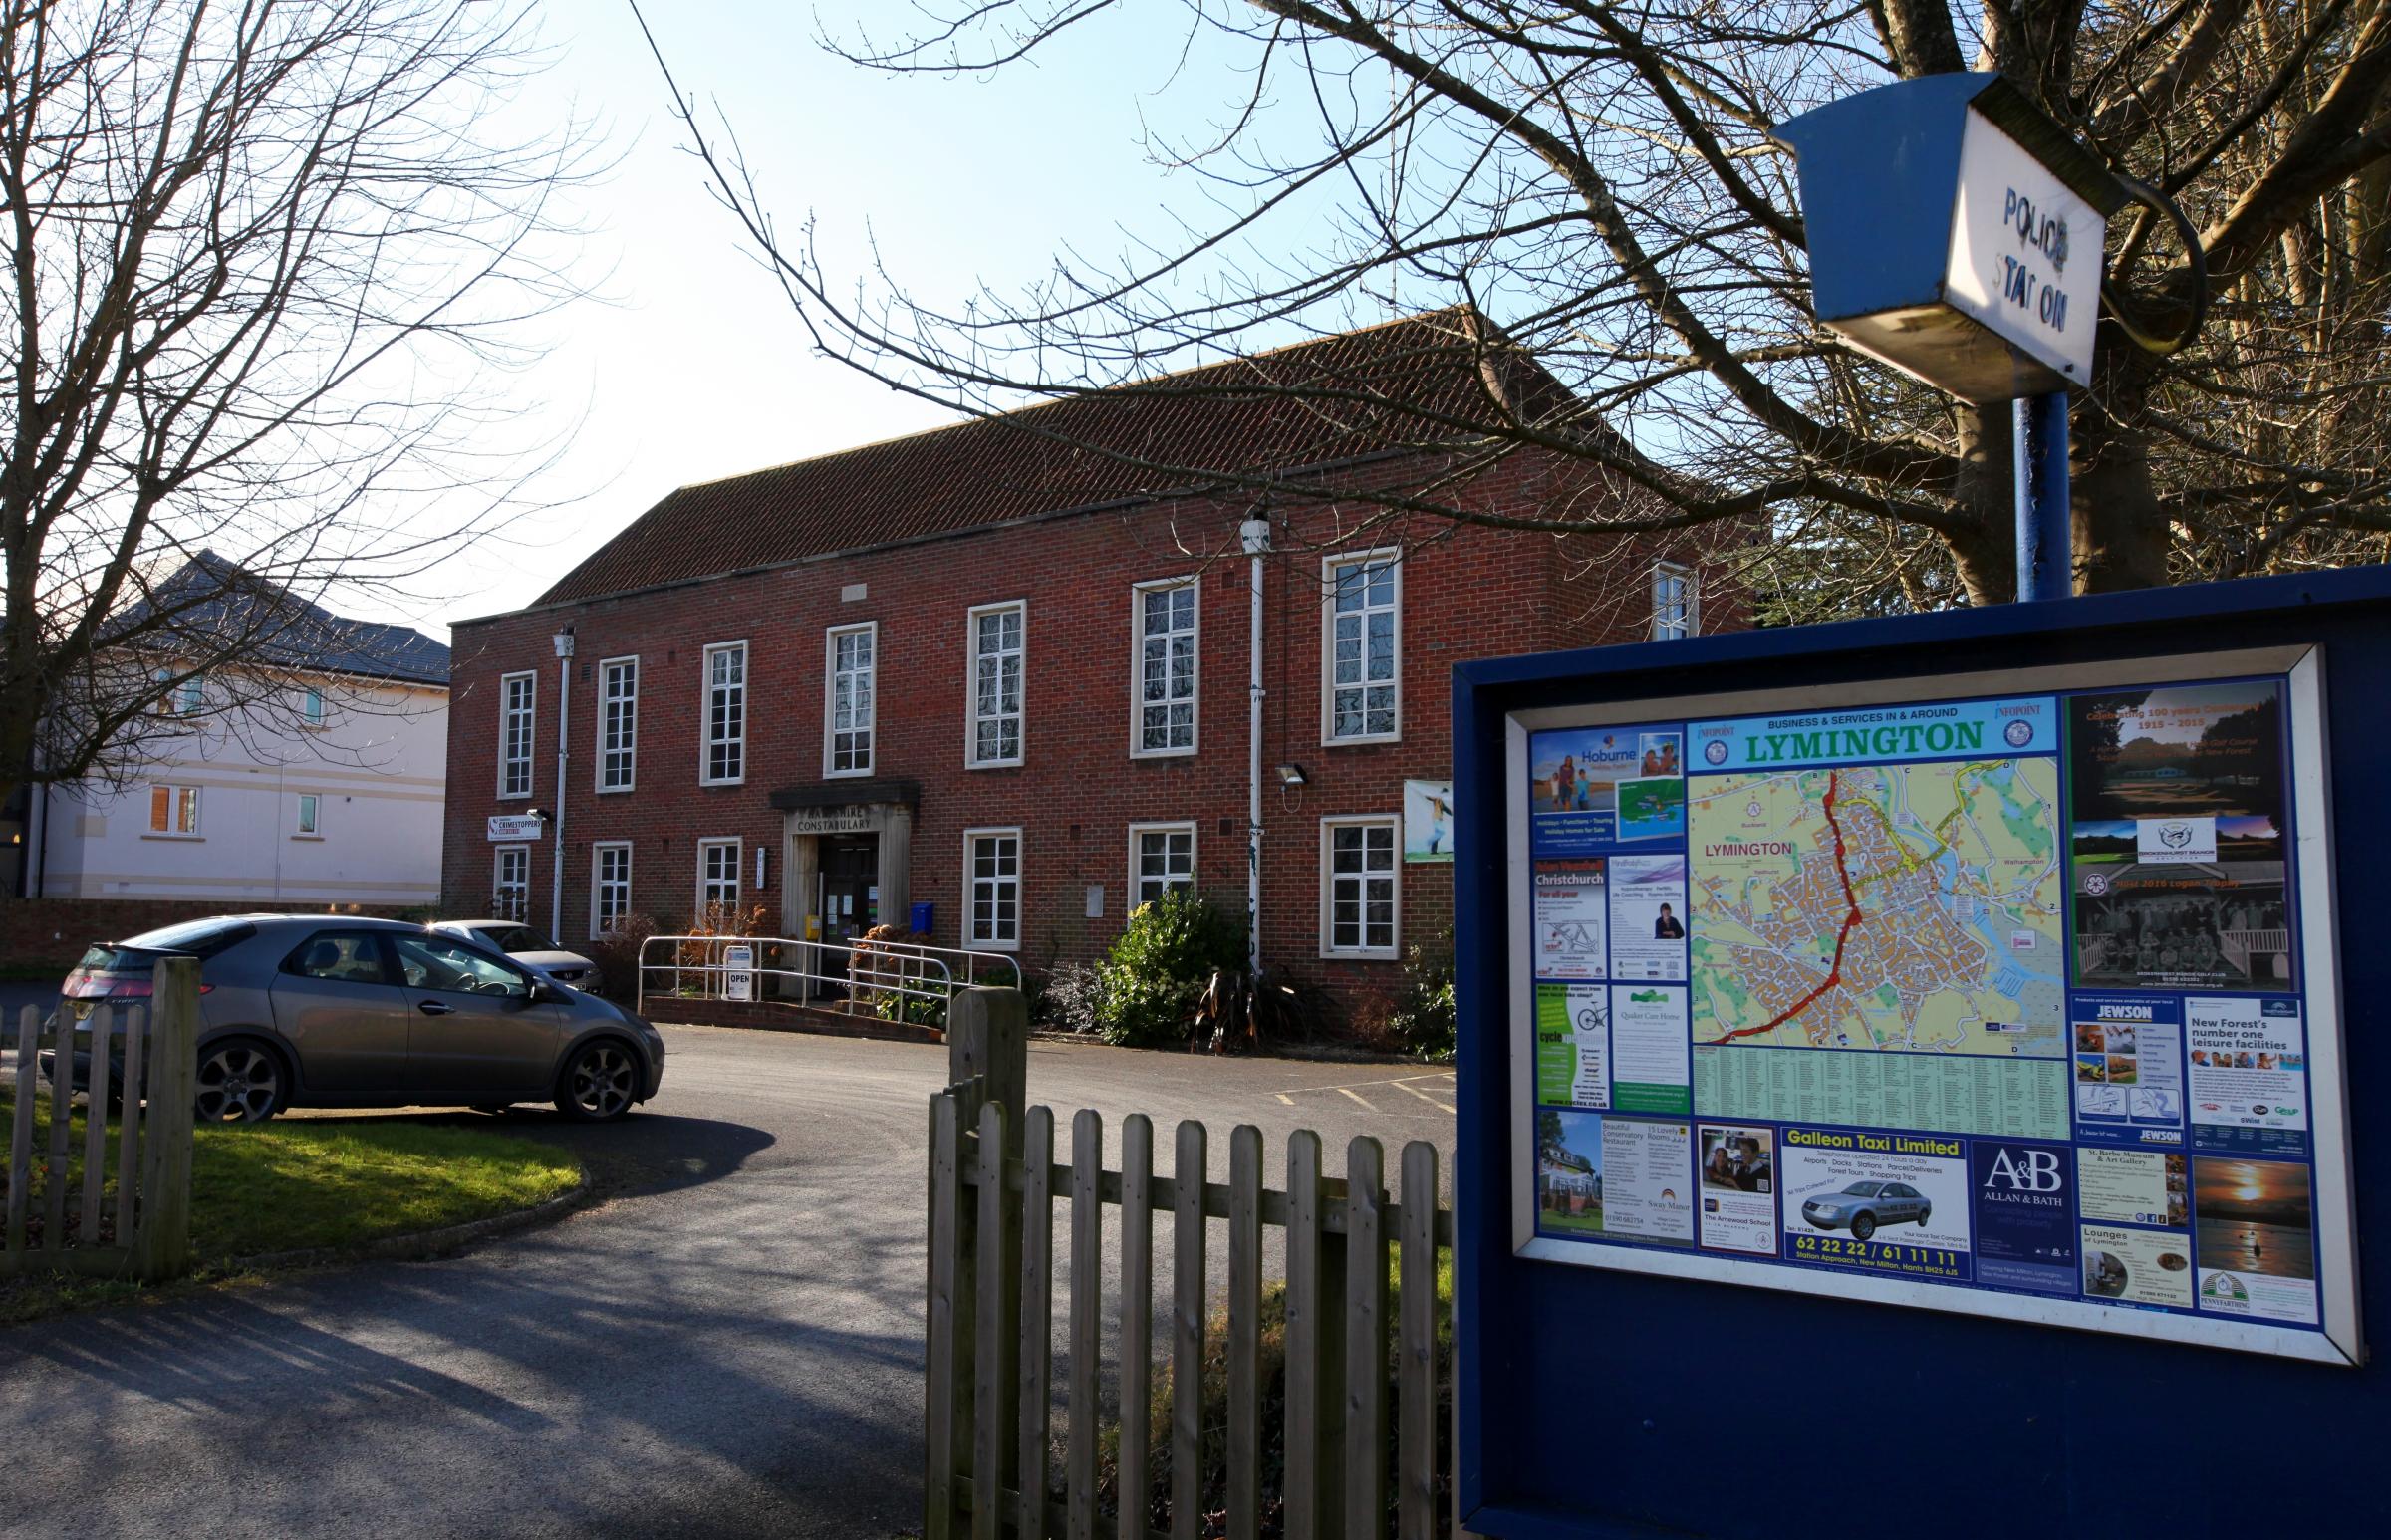 The former police station at Southampton Road, Lymington. A proposal to replace it with 32 flats will be examined at a public inquiry.